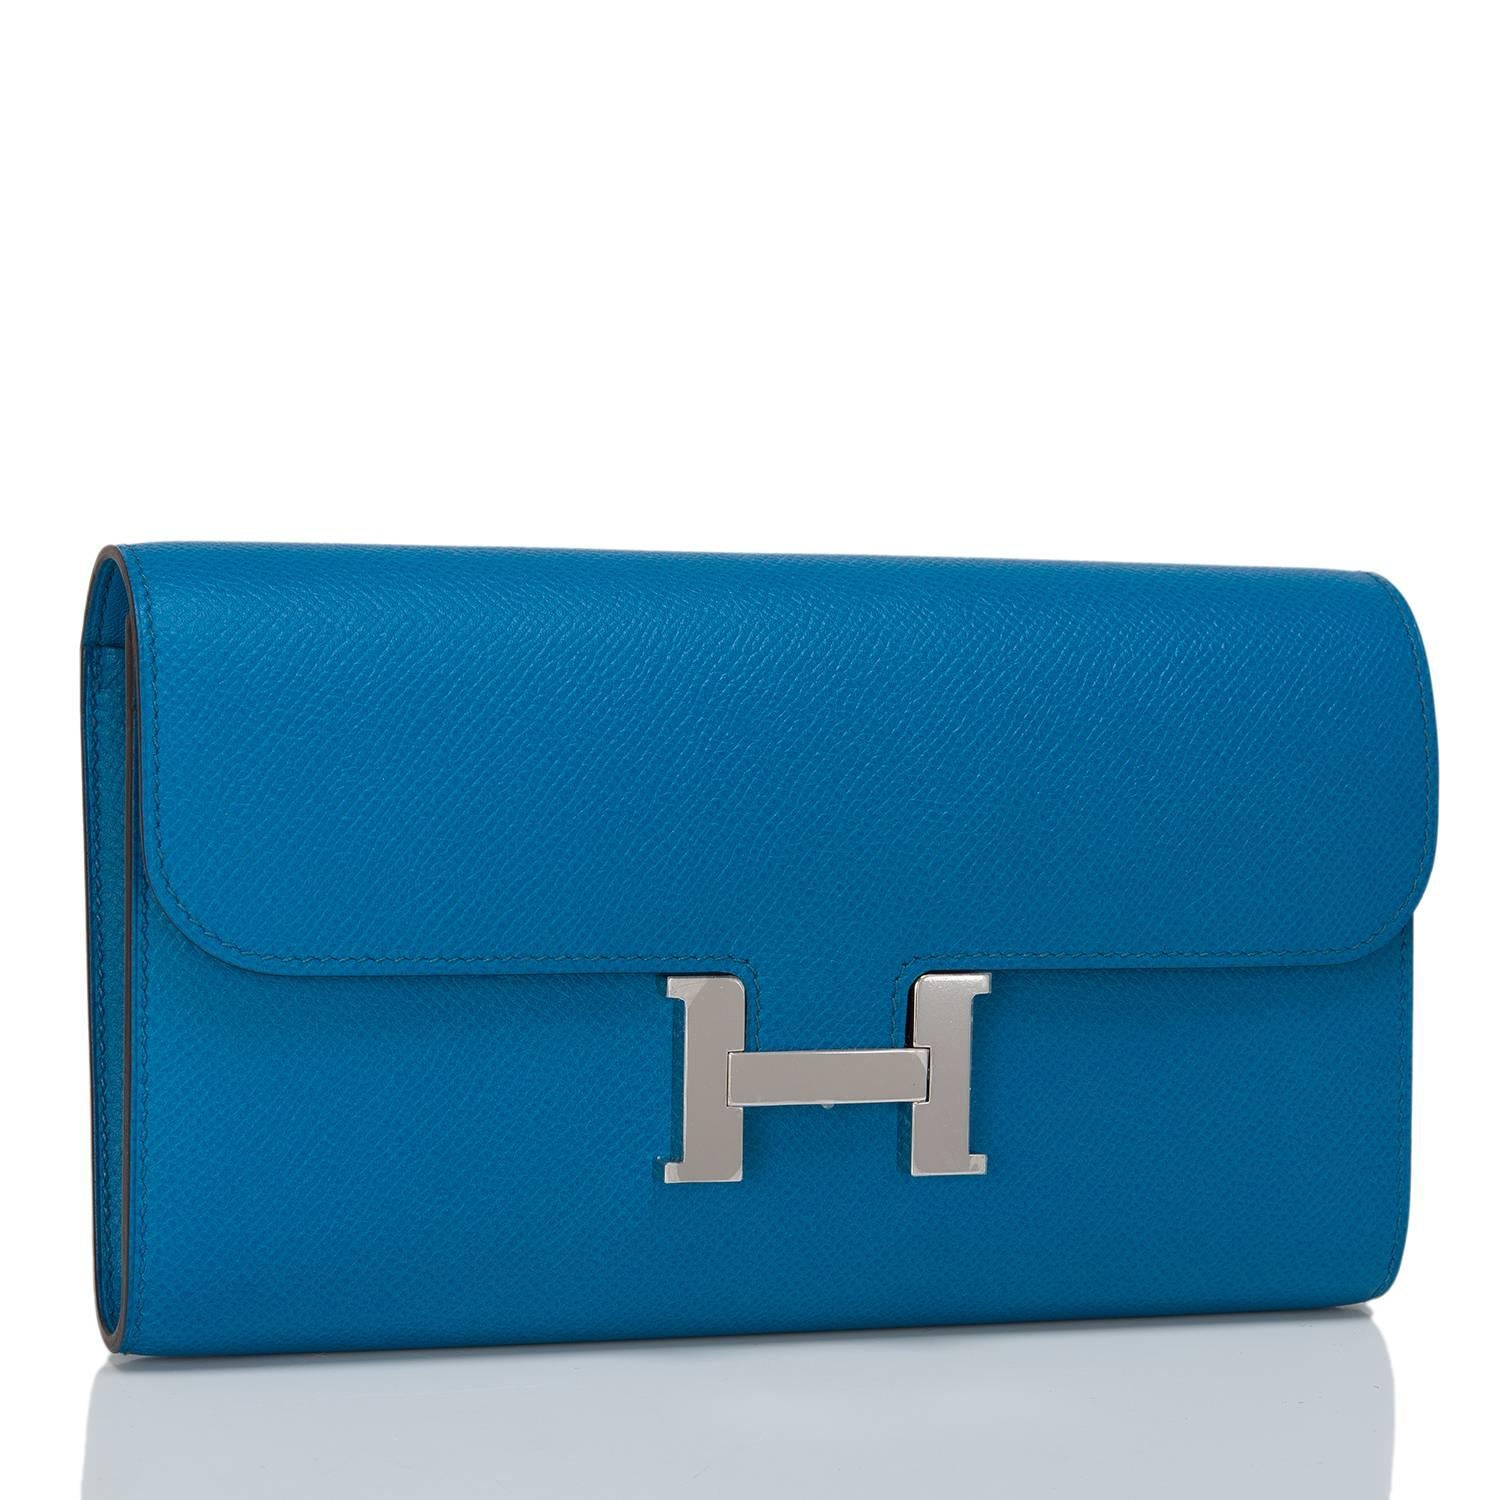 This classic Hermes Constance Long Wallet in Blue Izmir epsom leather with palladium hardware features tonal stitching, metal 